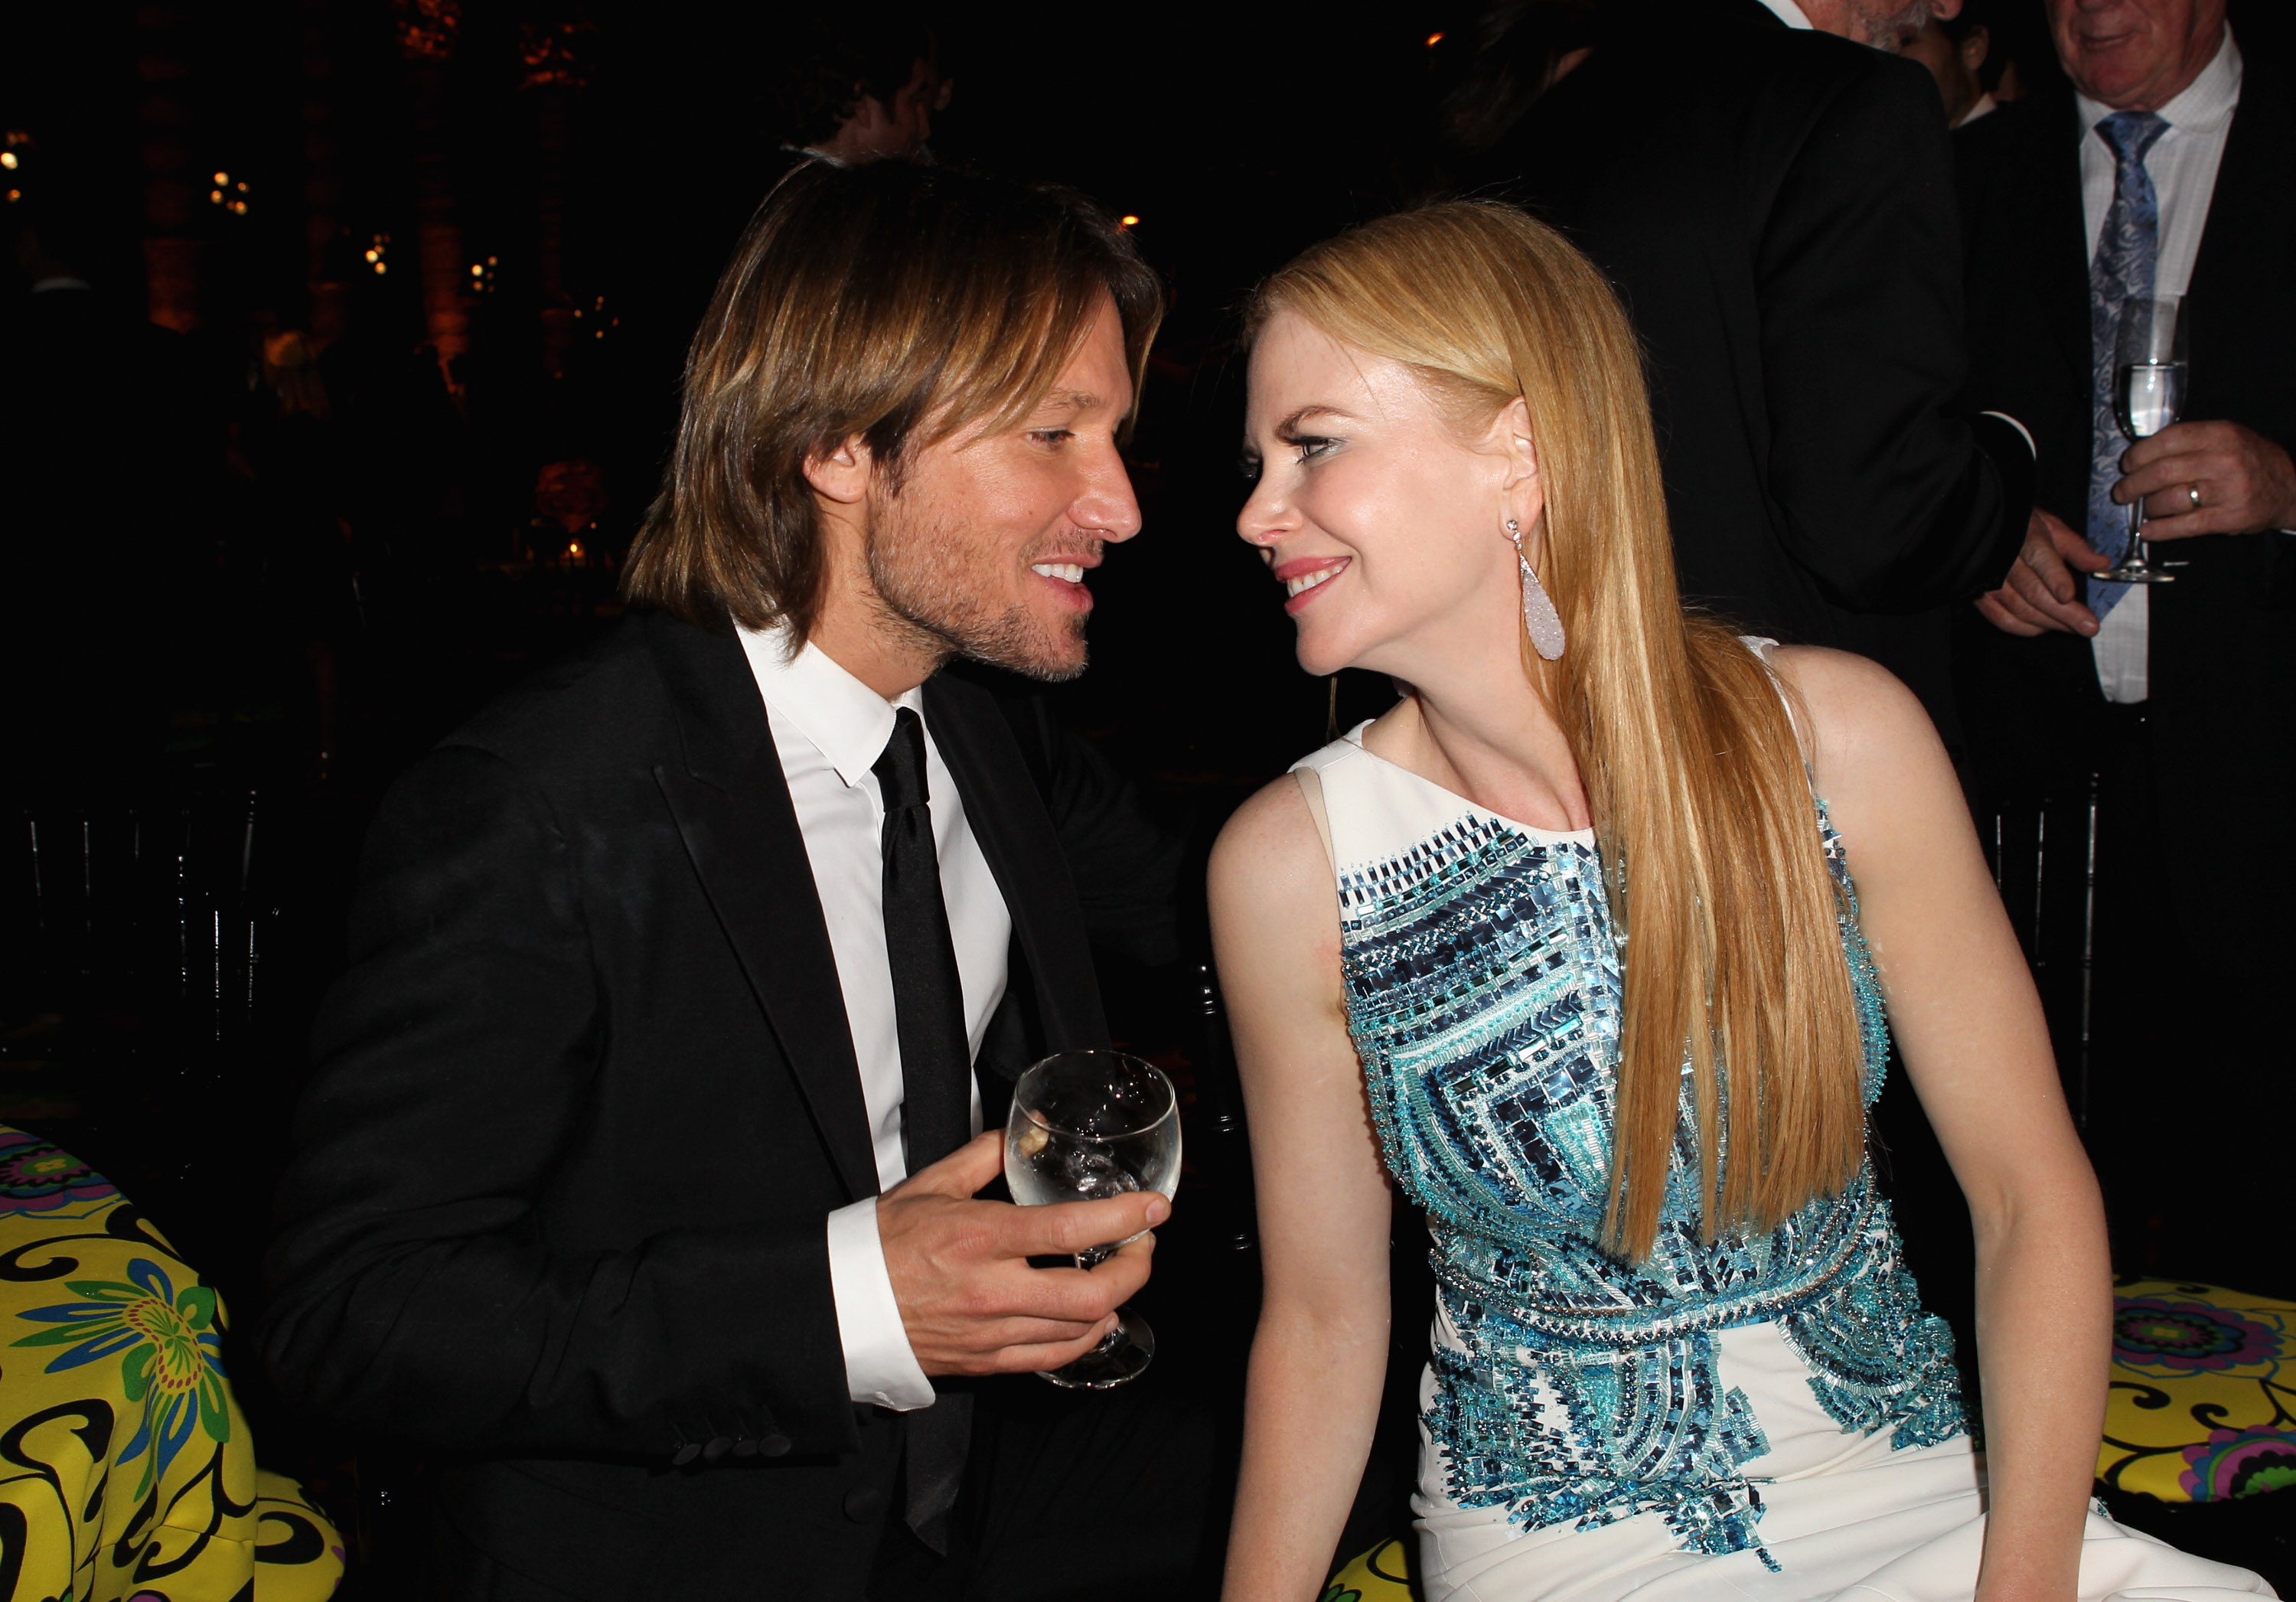 Keith Urban and Nicole Kidman at HBO's Official Emmy After-Party on September 23, 2012, in Los Angeles, California. | Source: Getty Images